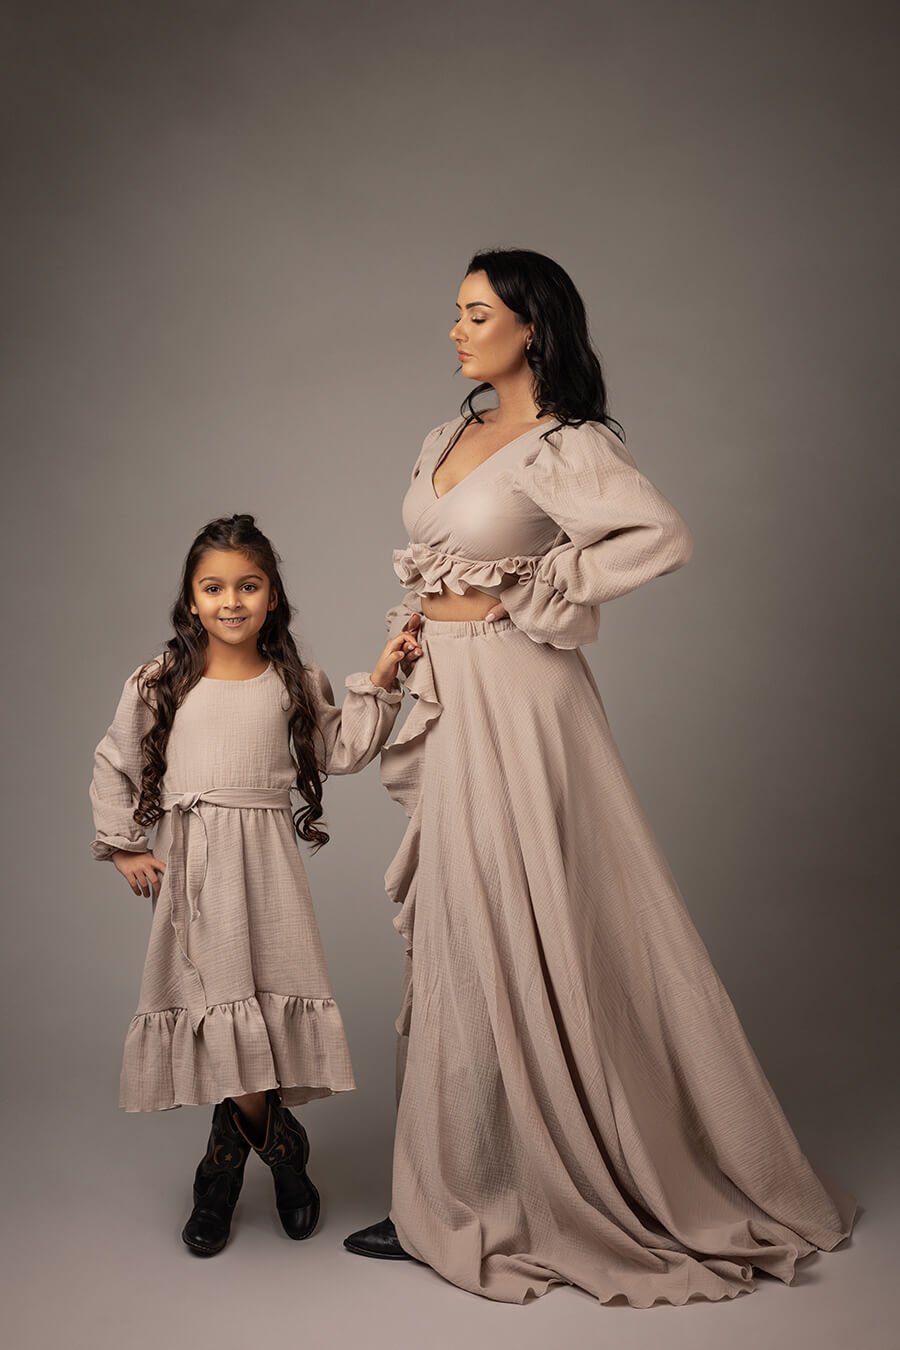 mom and daughter both with dark hair pose holding hands in a studio during a boho photoshoot. they are both wearing a sand outfit made of linen. both dresses have several ruffle details. the mom wears a long skirt and a top with long sleeves and an adjustable sweetheart top.